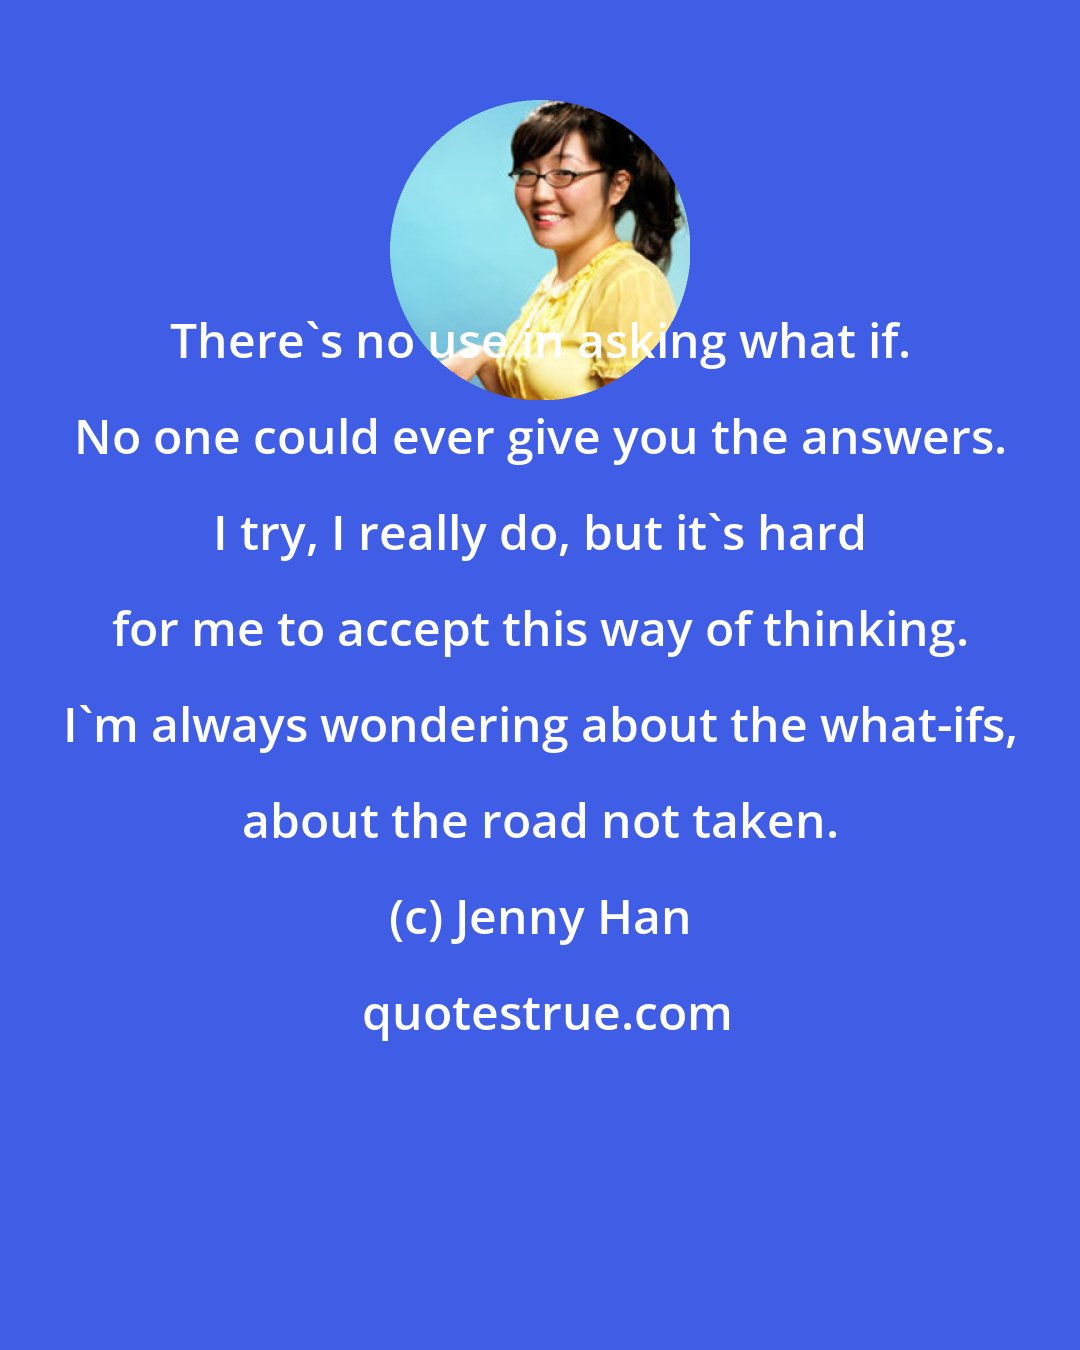 Jenny Han: There's no use in asking what if. No one could ever give you the answers. I try, I really do, but it's hard for me to accept this way of thinking. I'm always wondering about the what-ifs, about the road not taken.